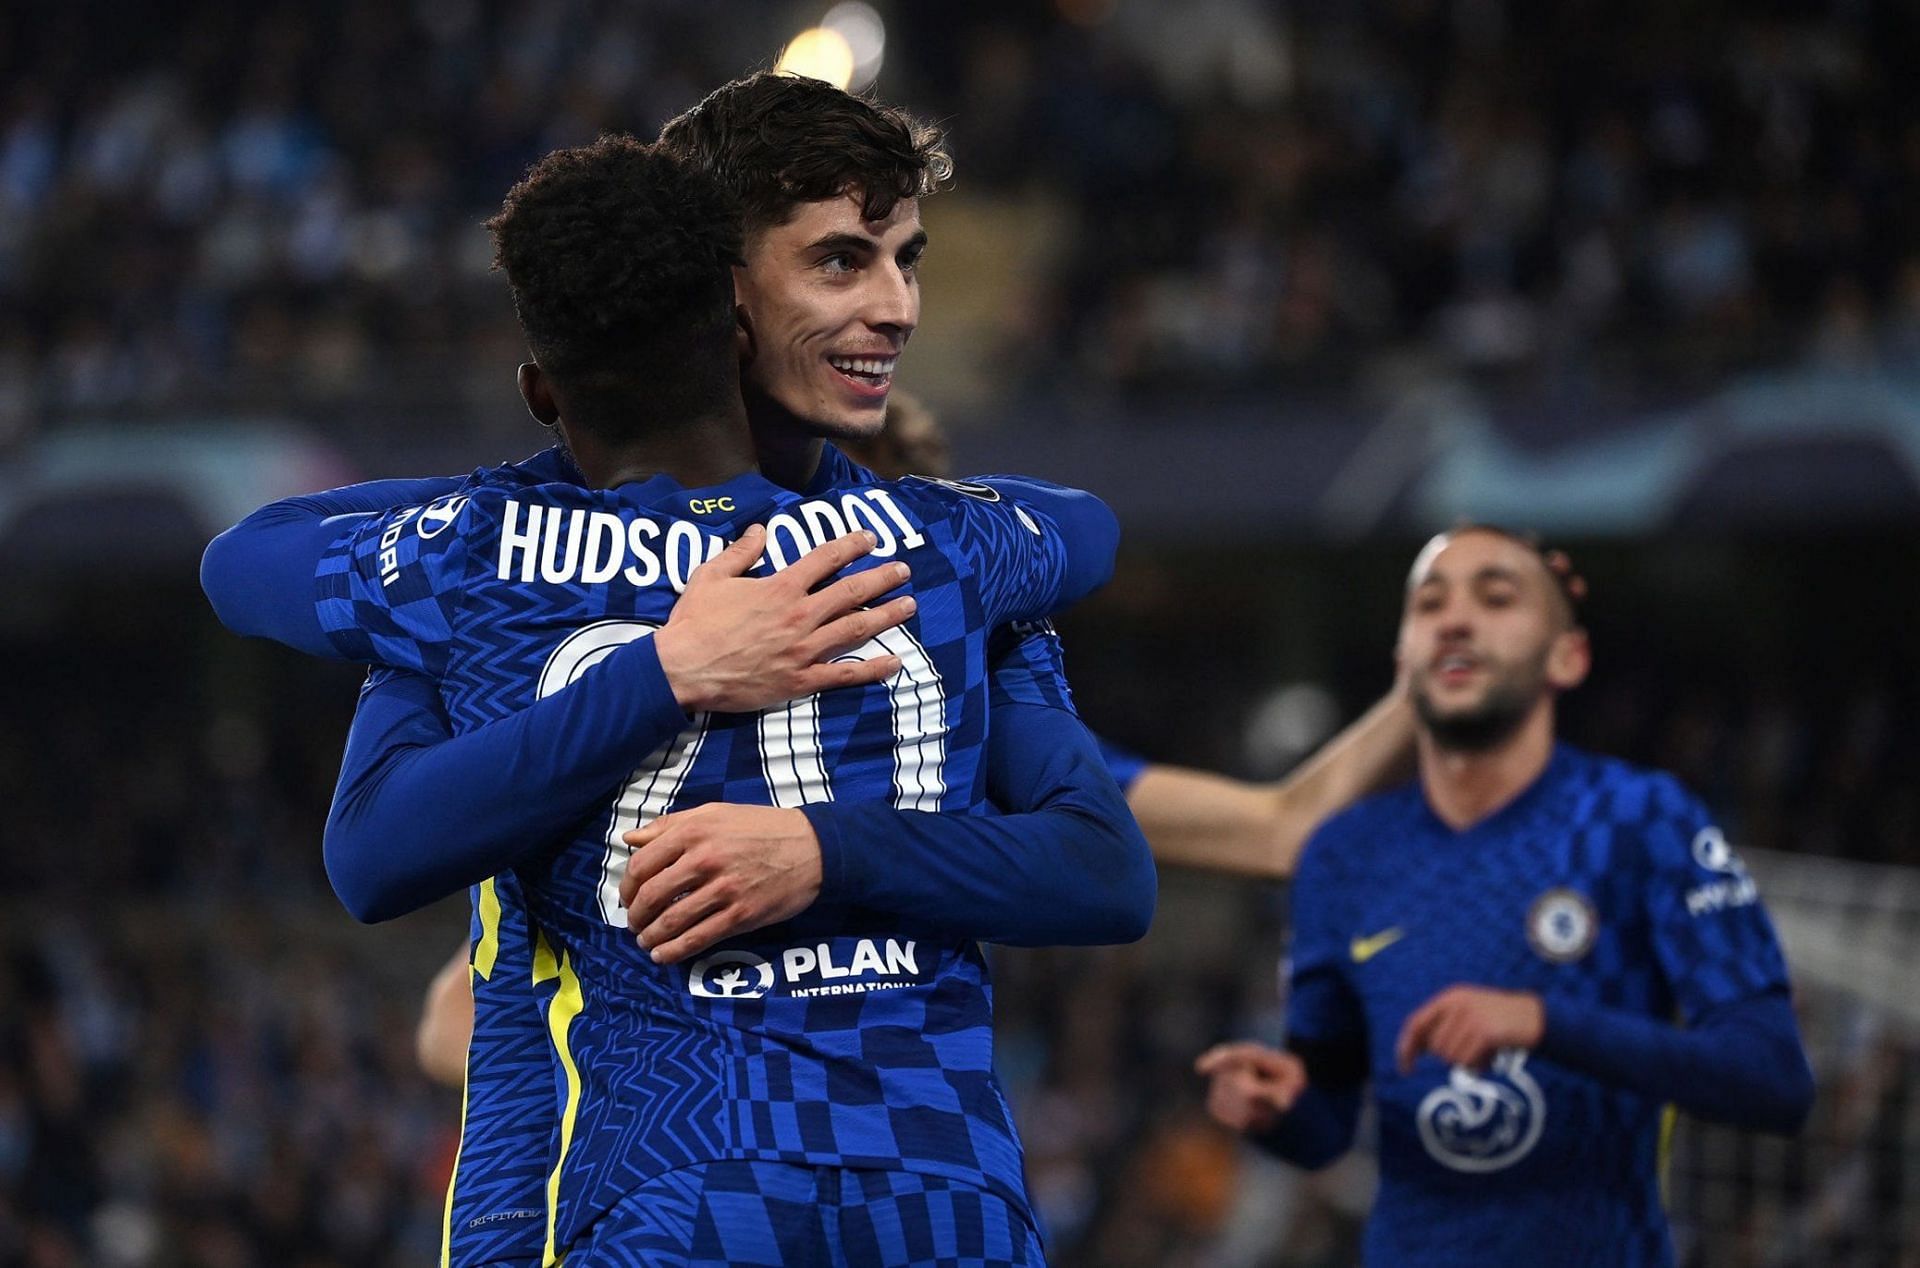 Chelsea extended their winning run after beating Malmo